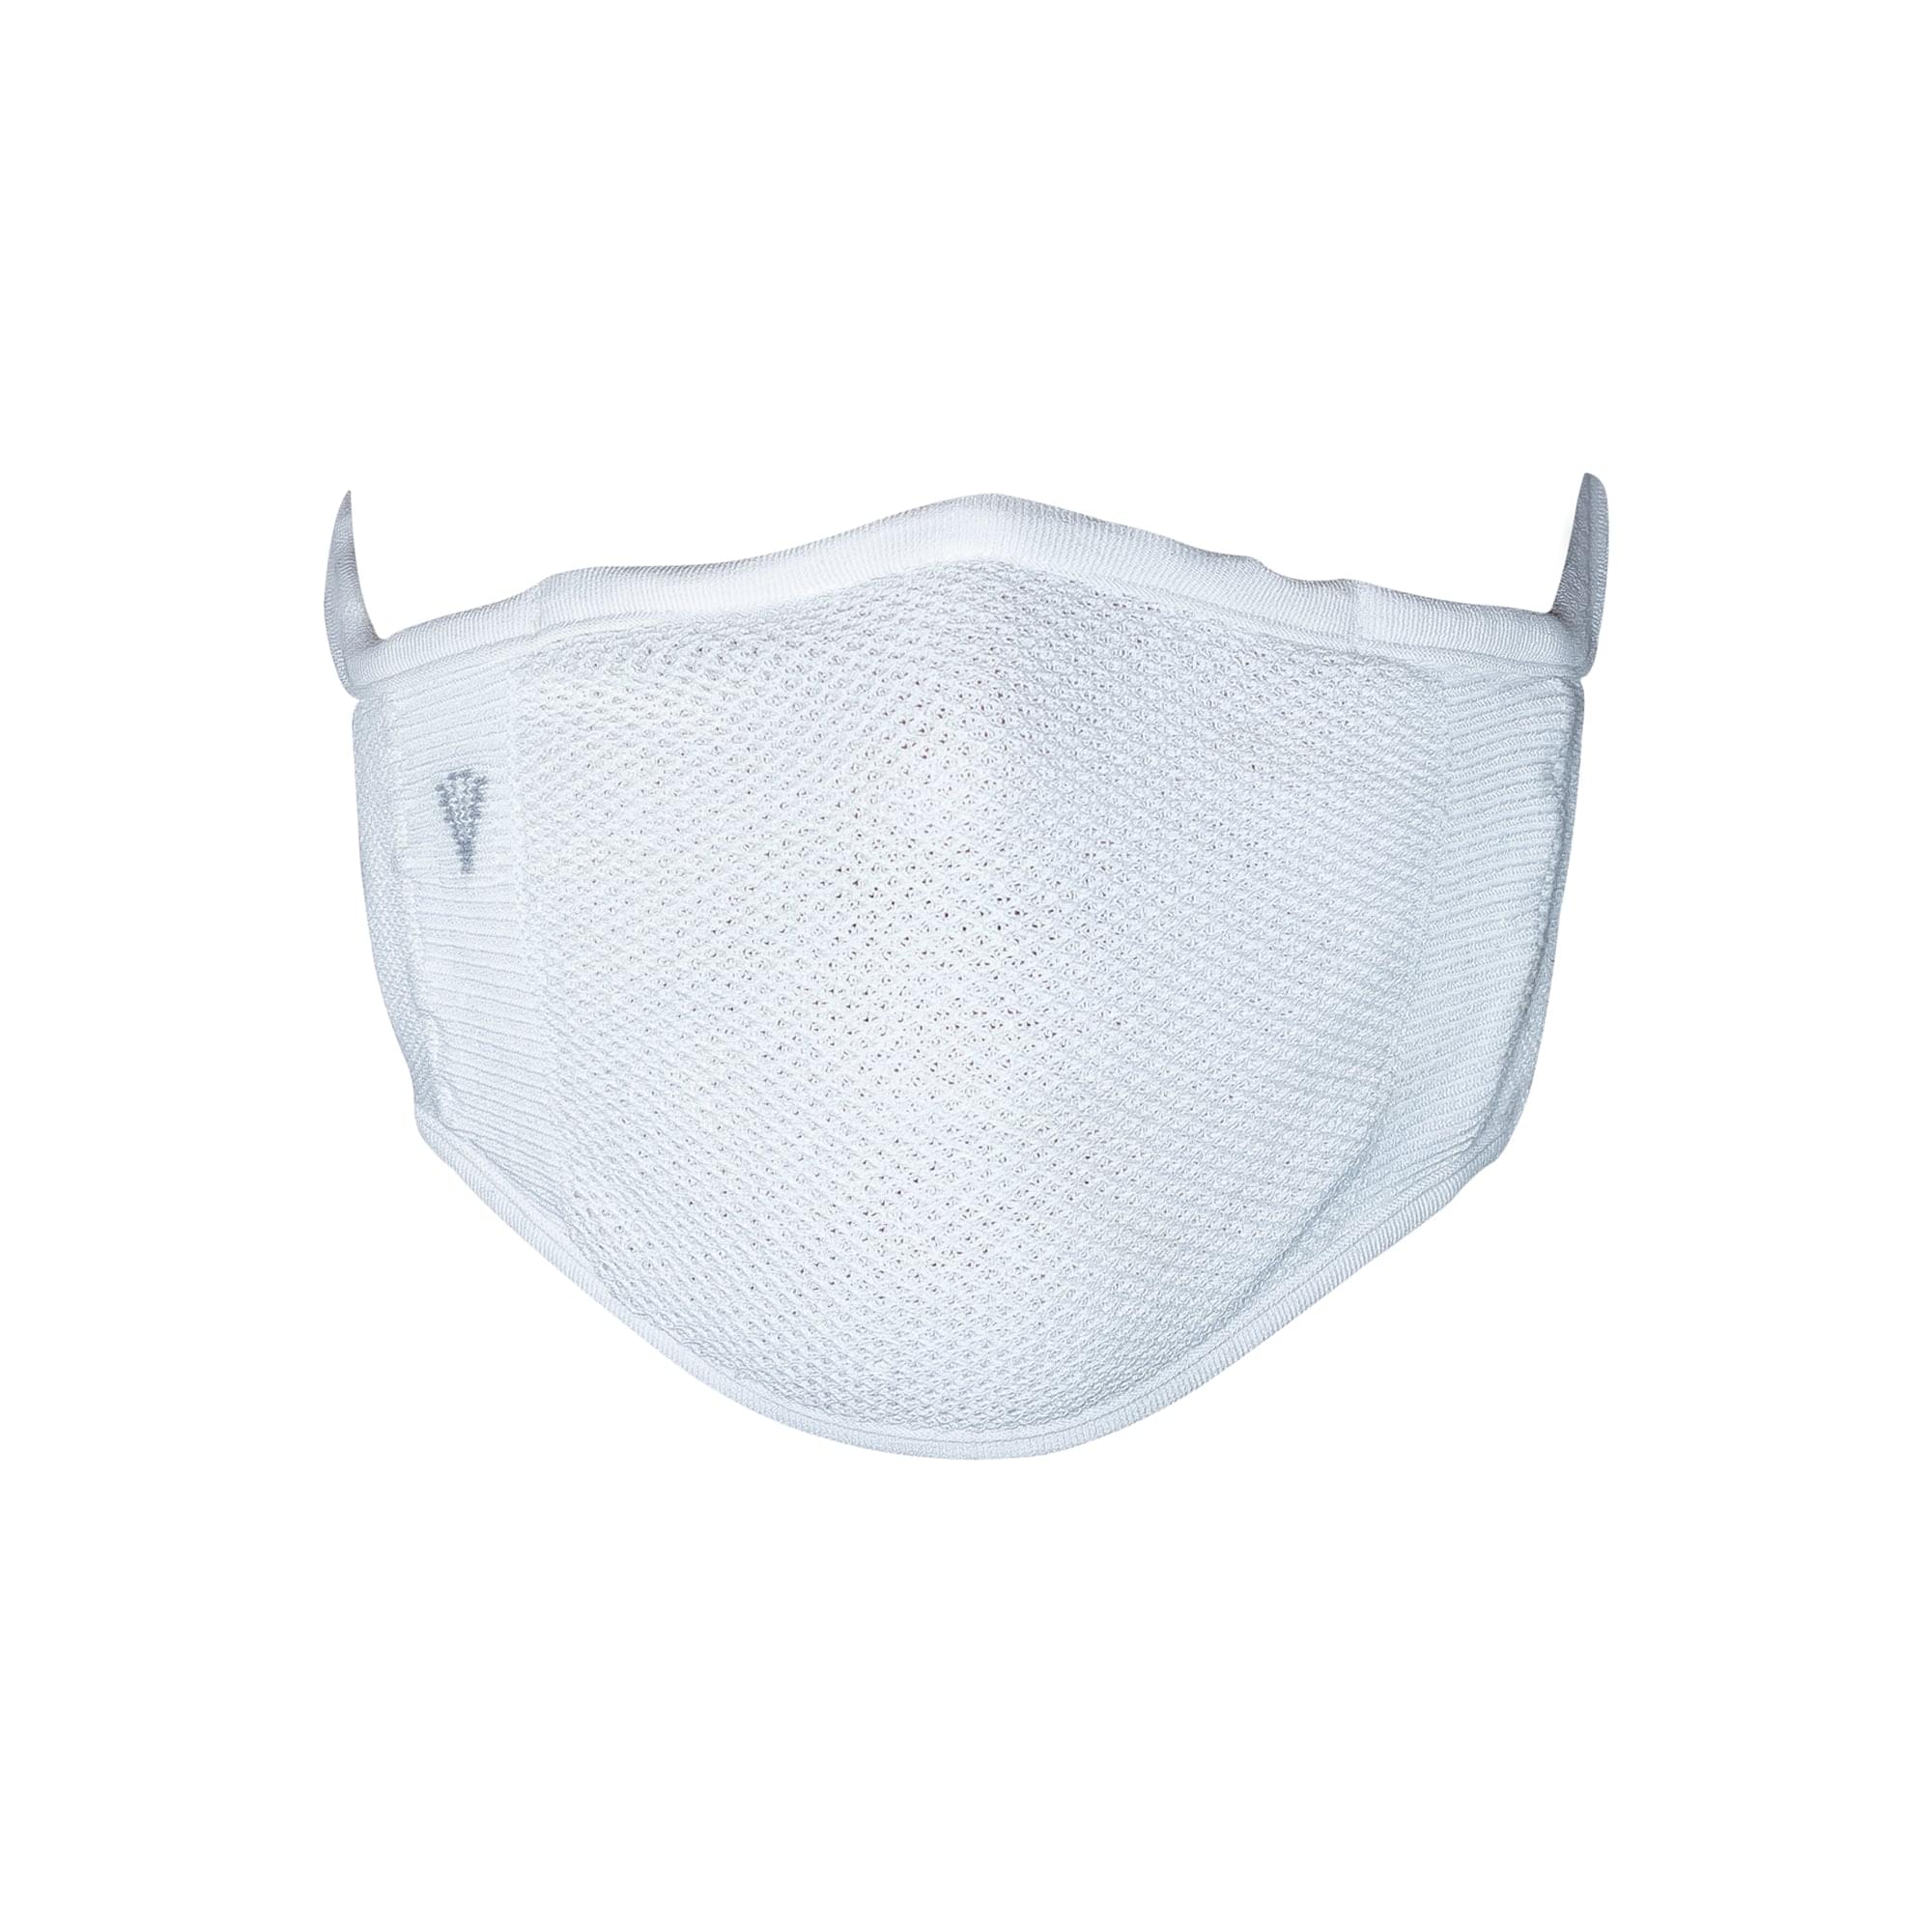 2-Layer Antibacterial Protection Mask for Adults (Unisex) - Pack of 2